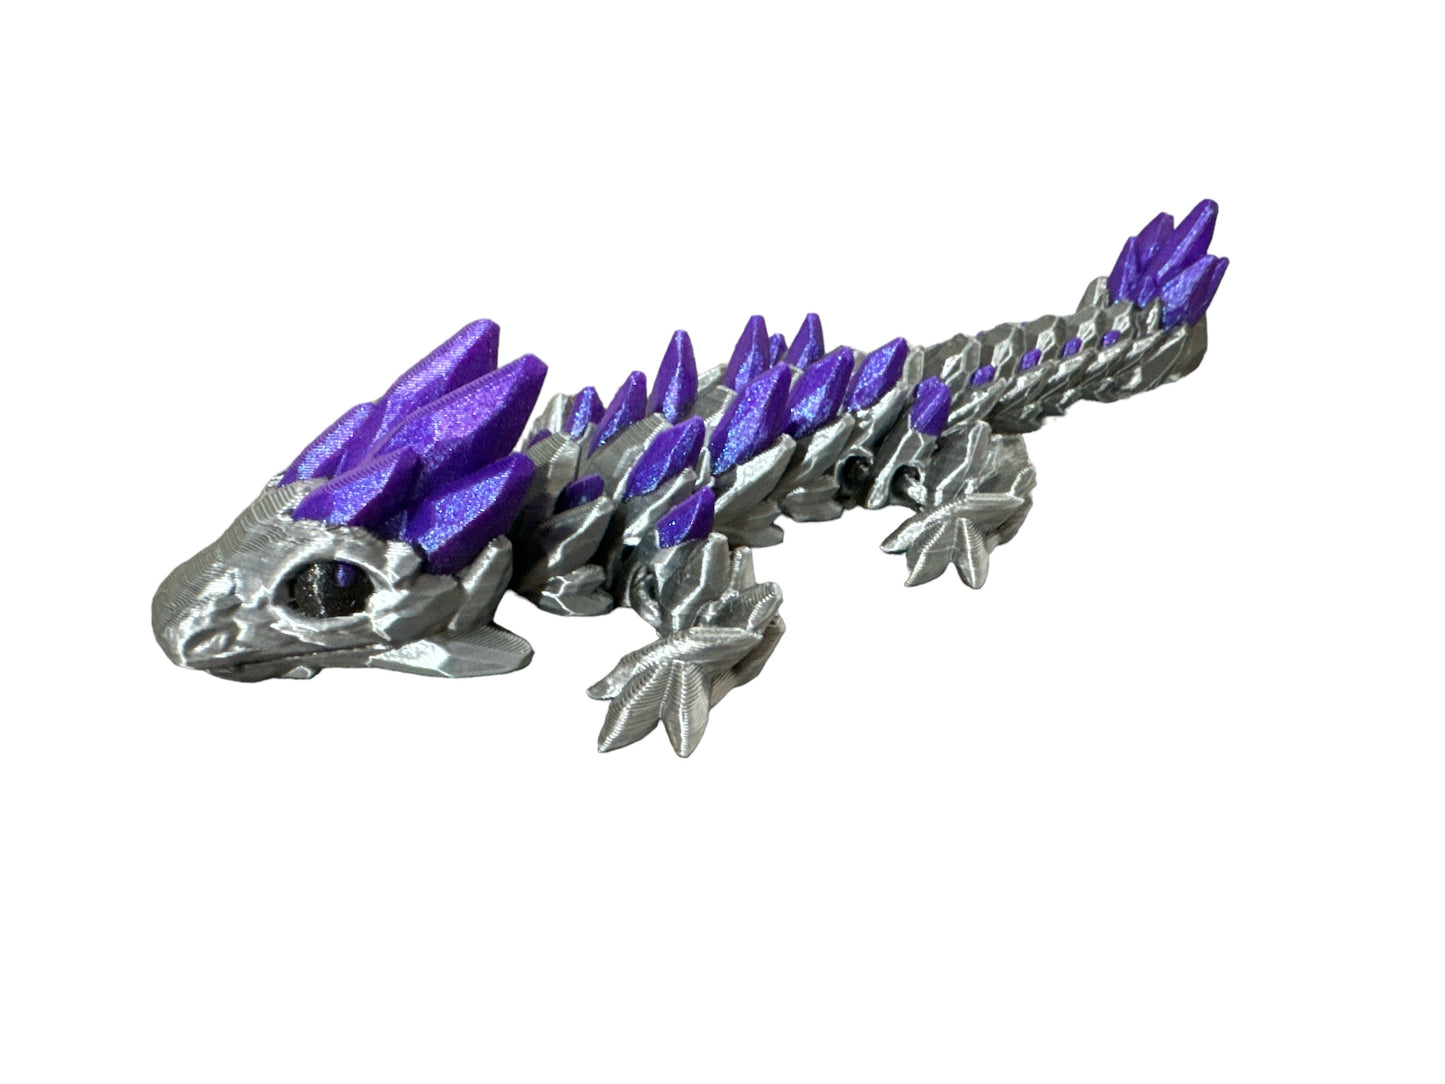 Baby Gemstone Colored Dragon 3D Printed Articulating Figurine